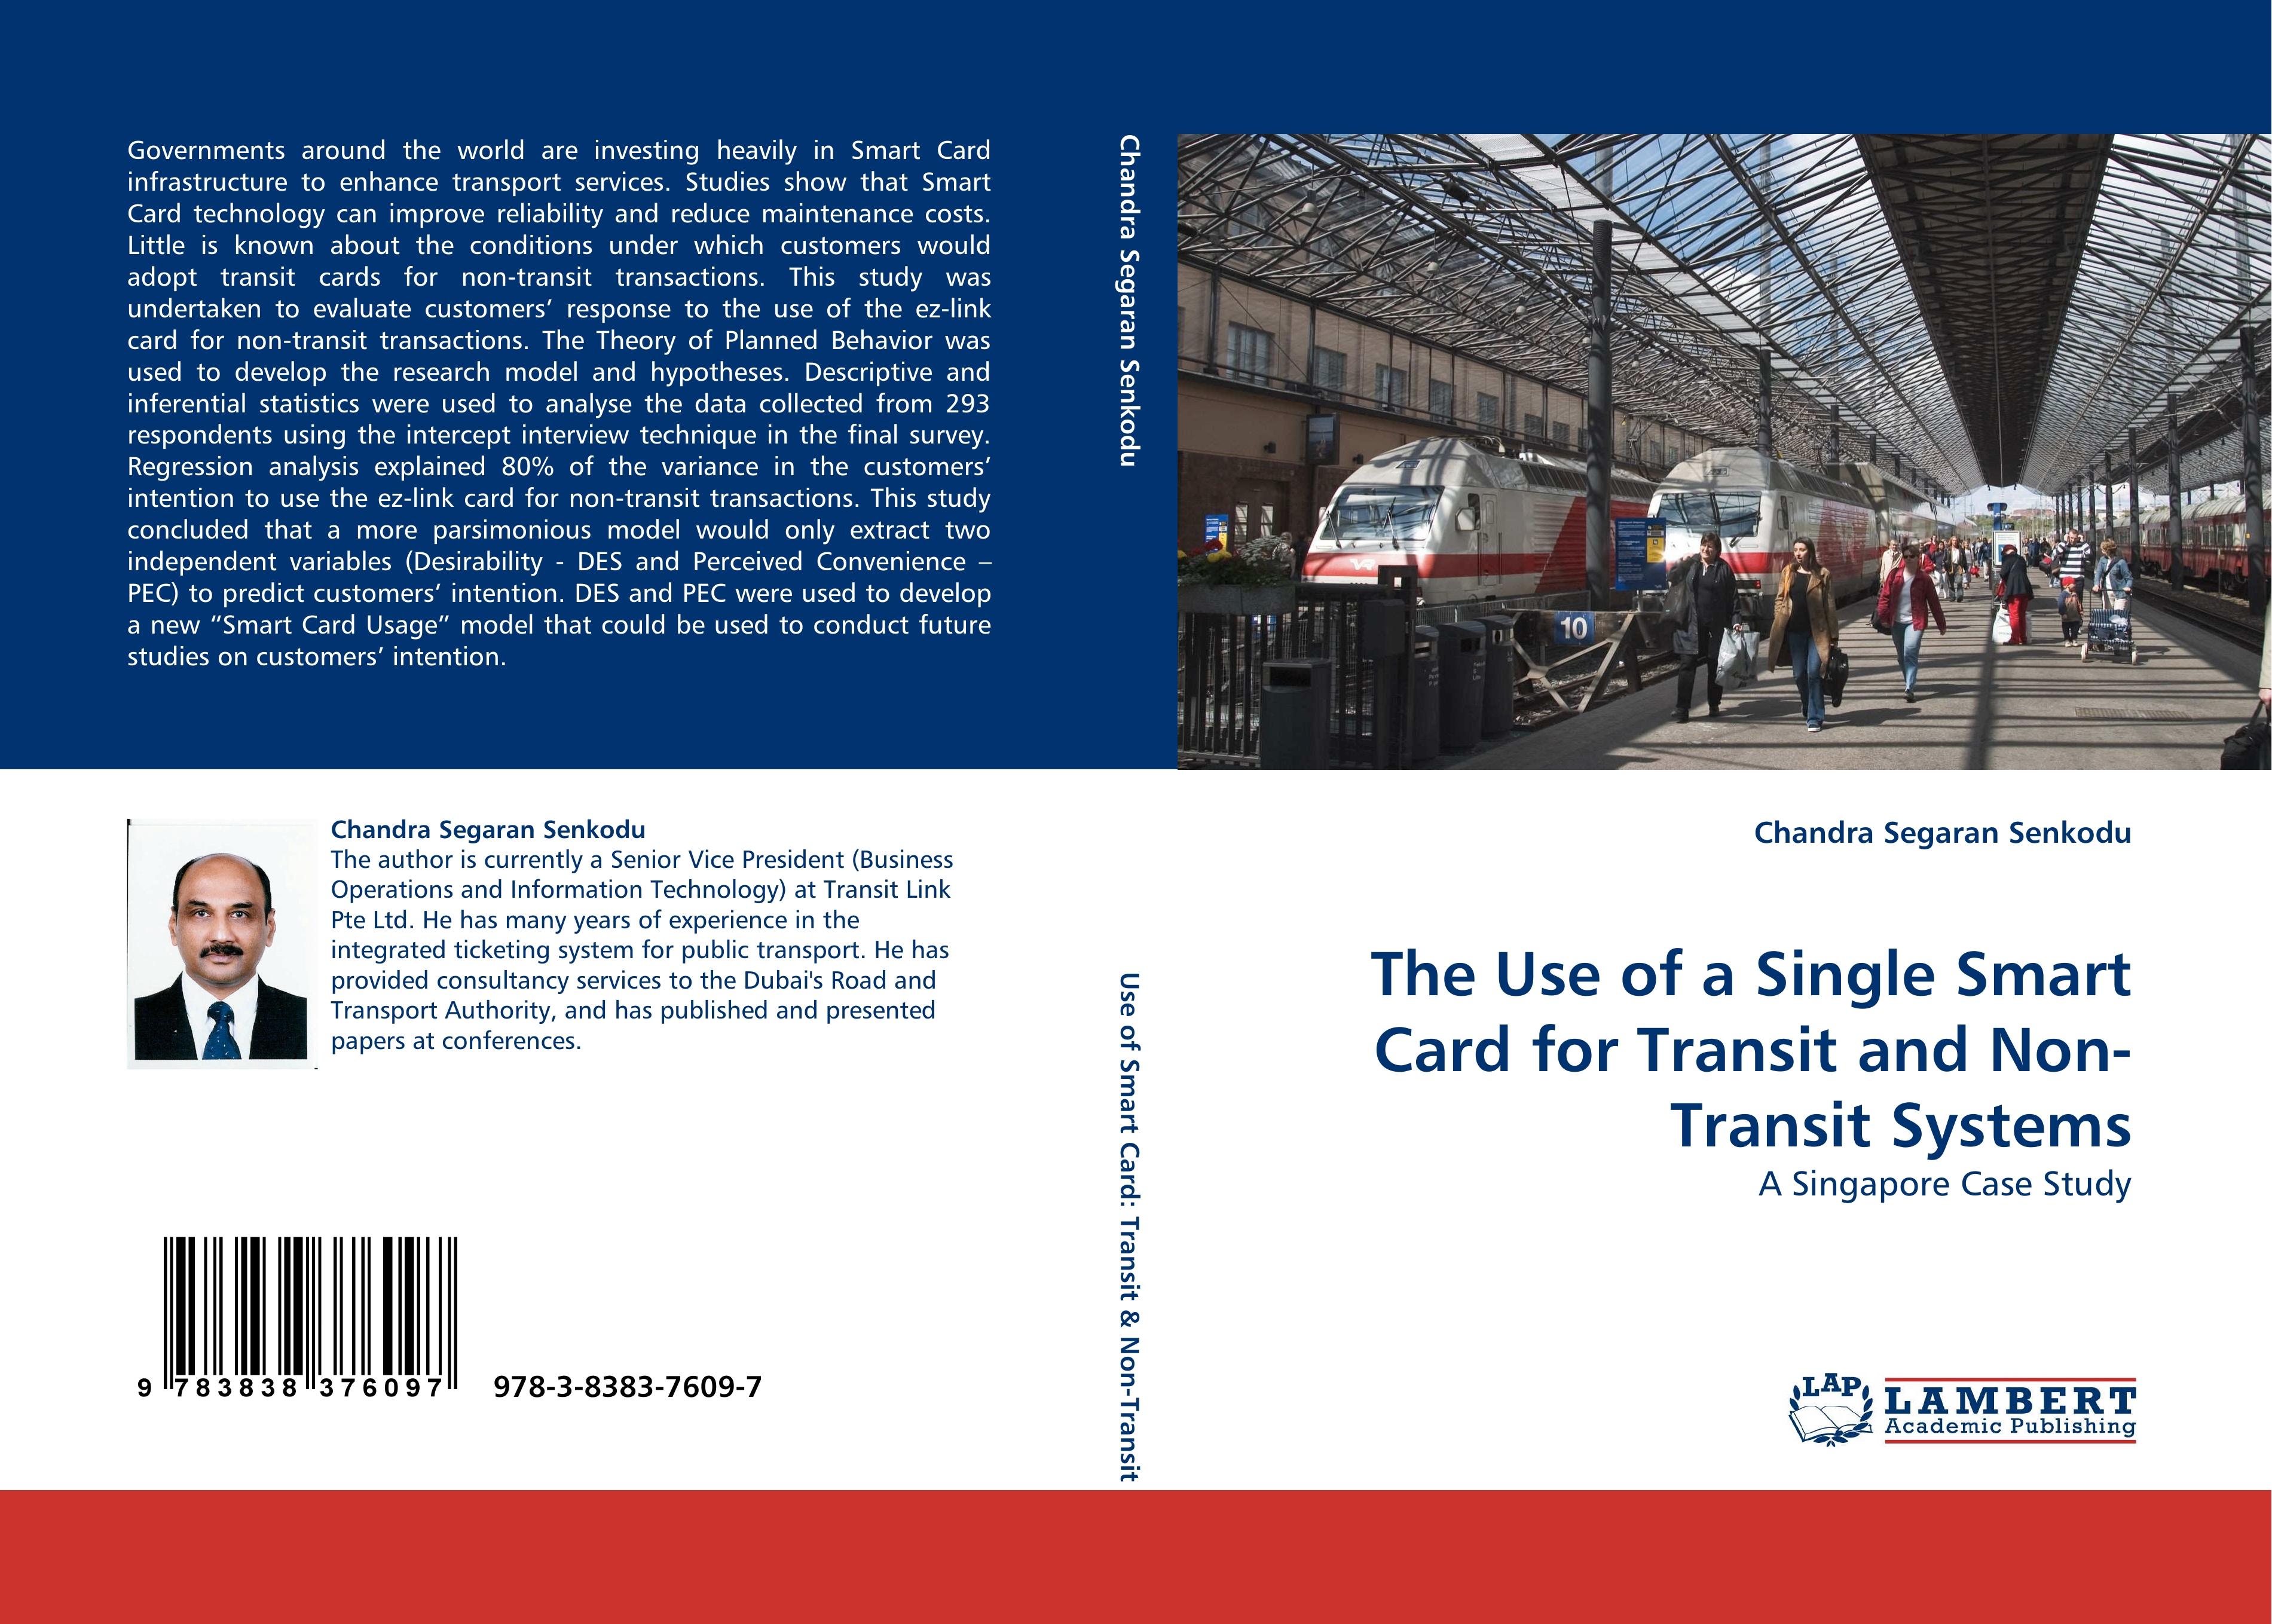 The Use of a Single Smart Card for Transit and Non-Transit Systems - Chandra Segaran Senkodu